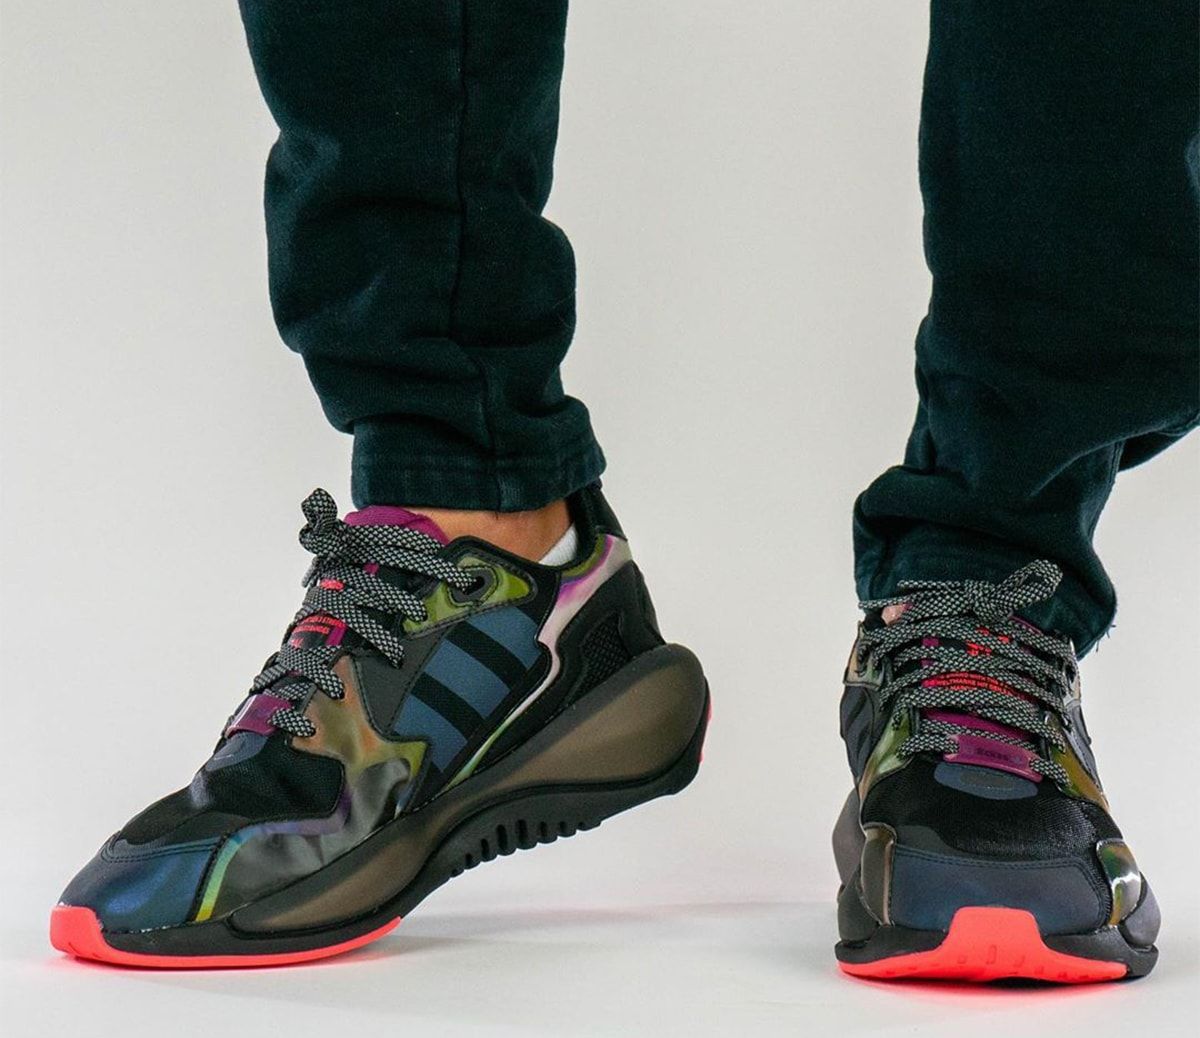 The atmos x adidas ZX Alkyne “Neo Tokyo” Arrives September 18th 